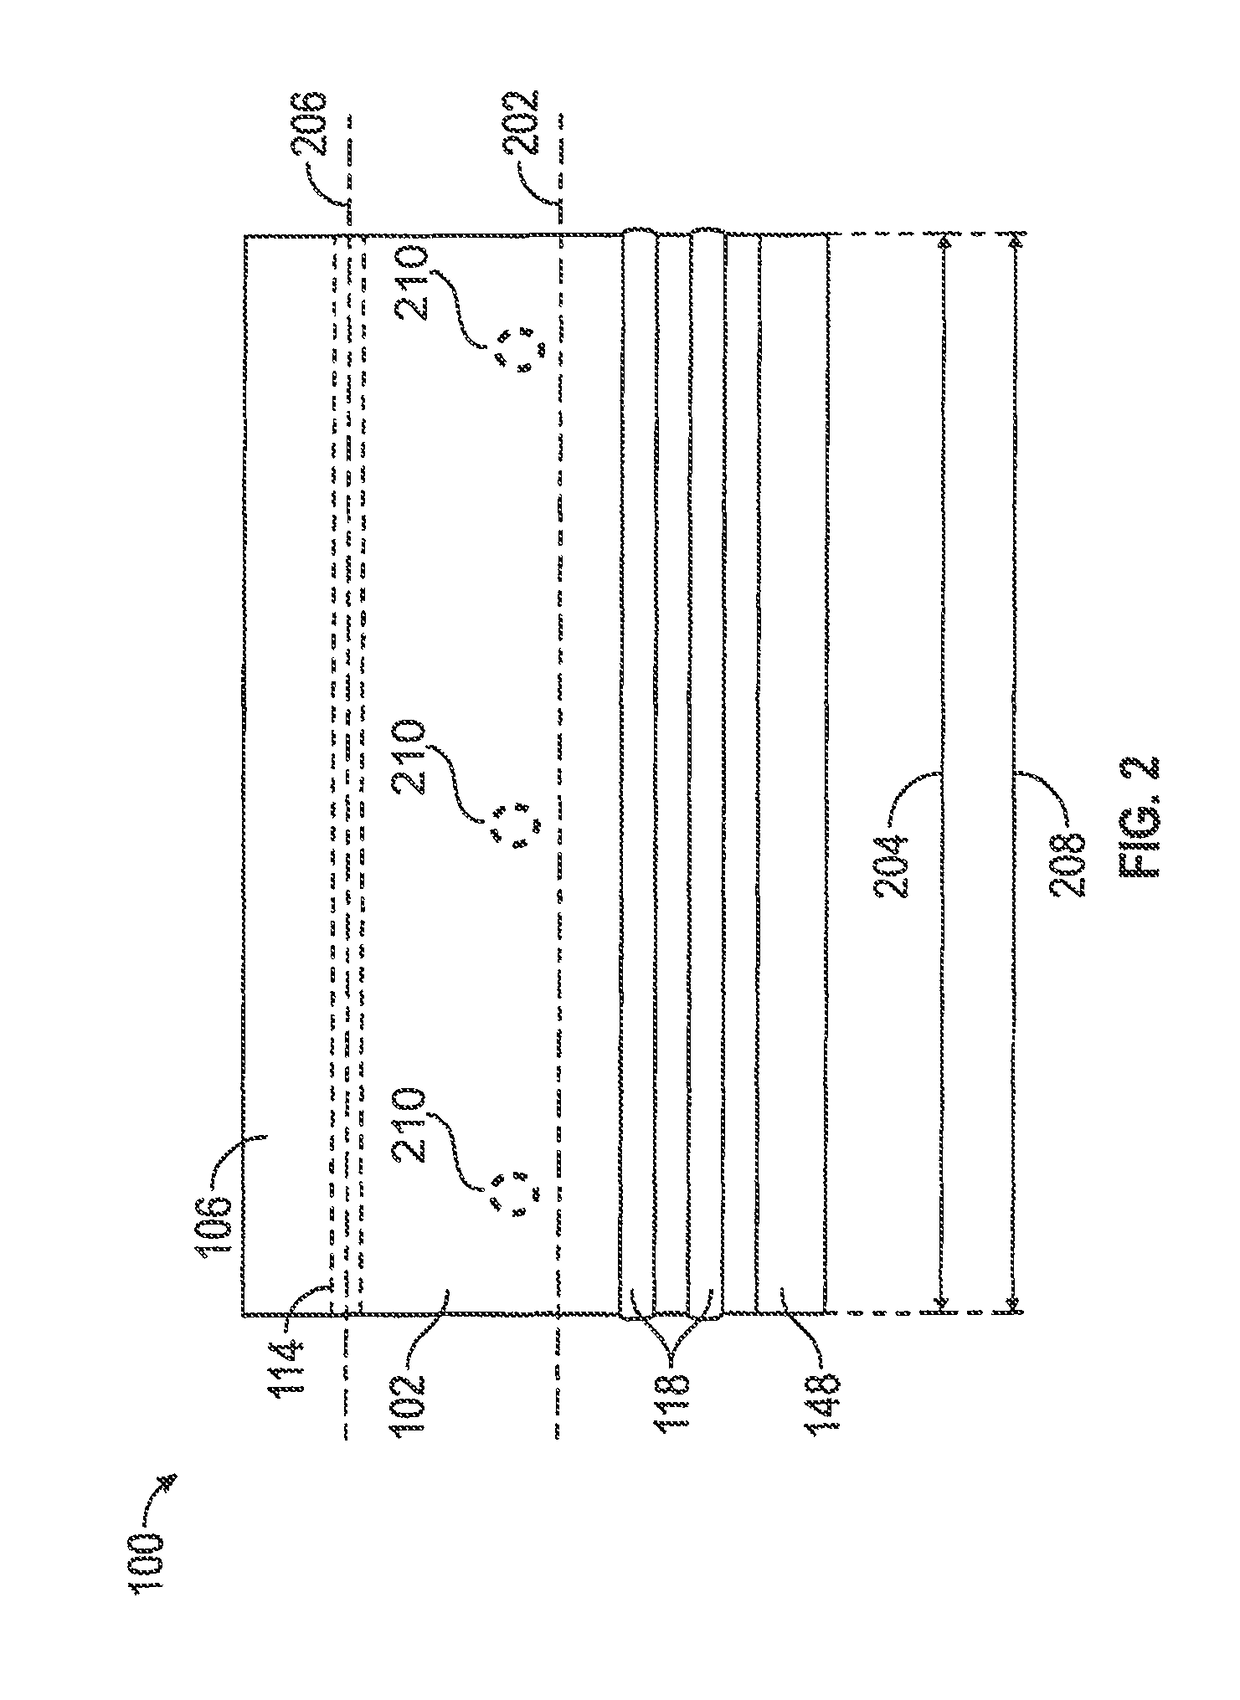 Expansion joint seal with surface load transfer, intumescent, and internal sensor